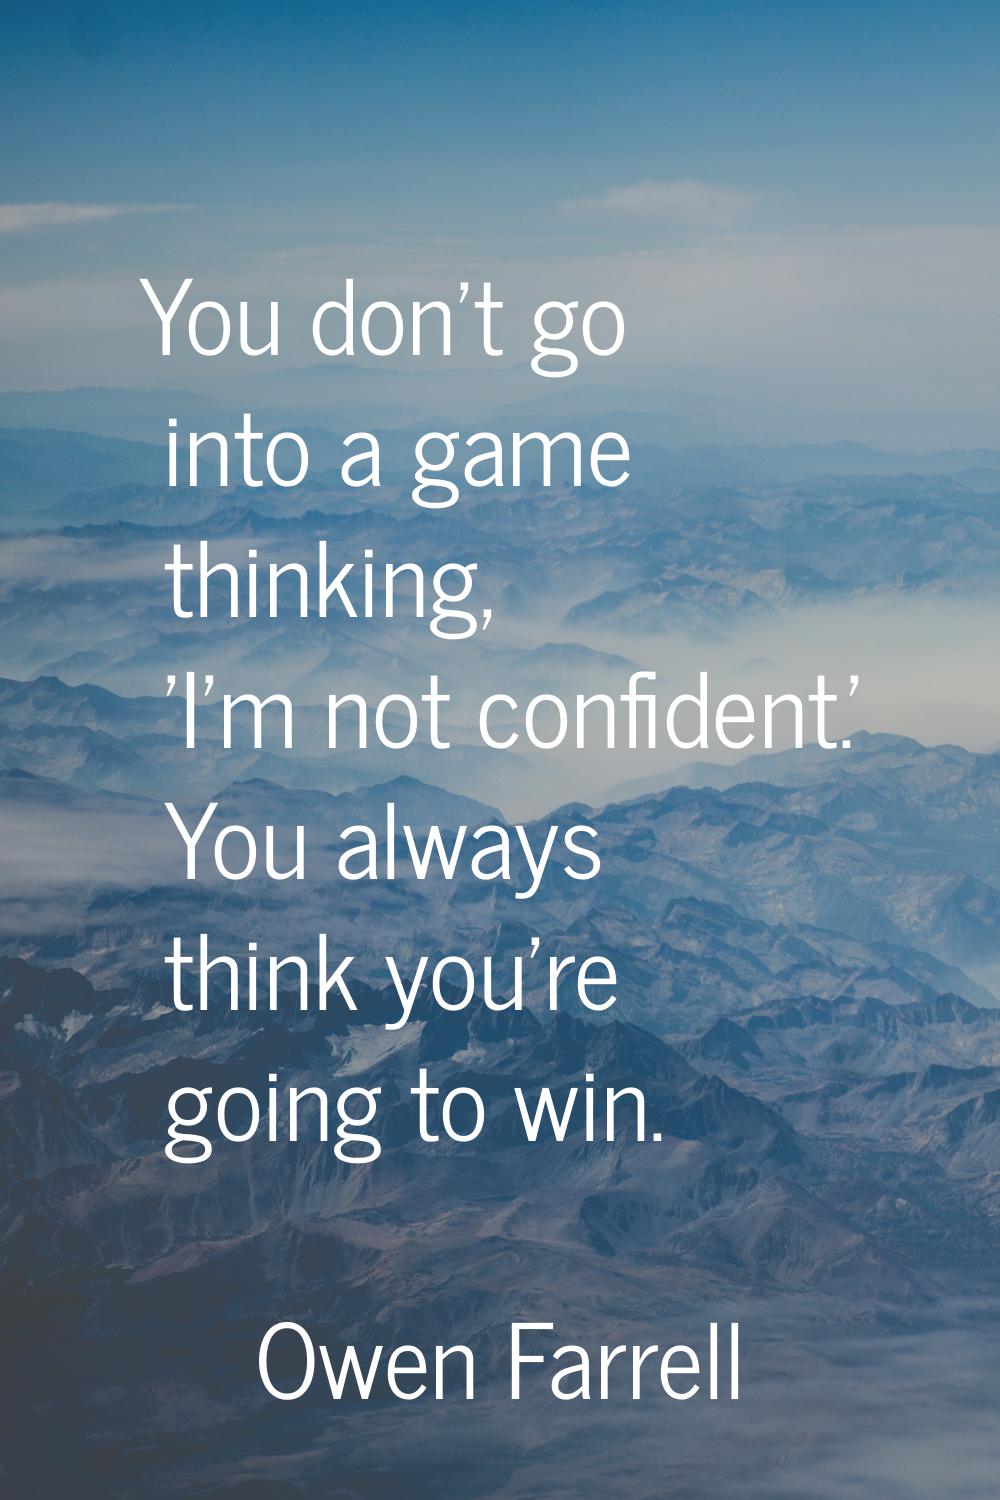 You don't go into a game thinking, 'I'm not confident.' You always think you're going to win.